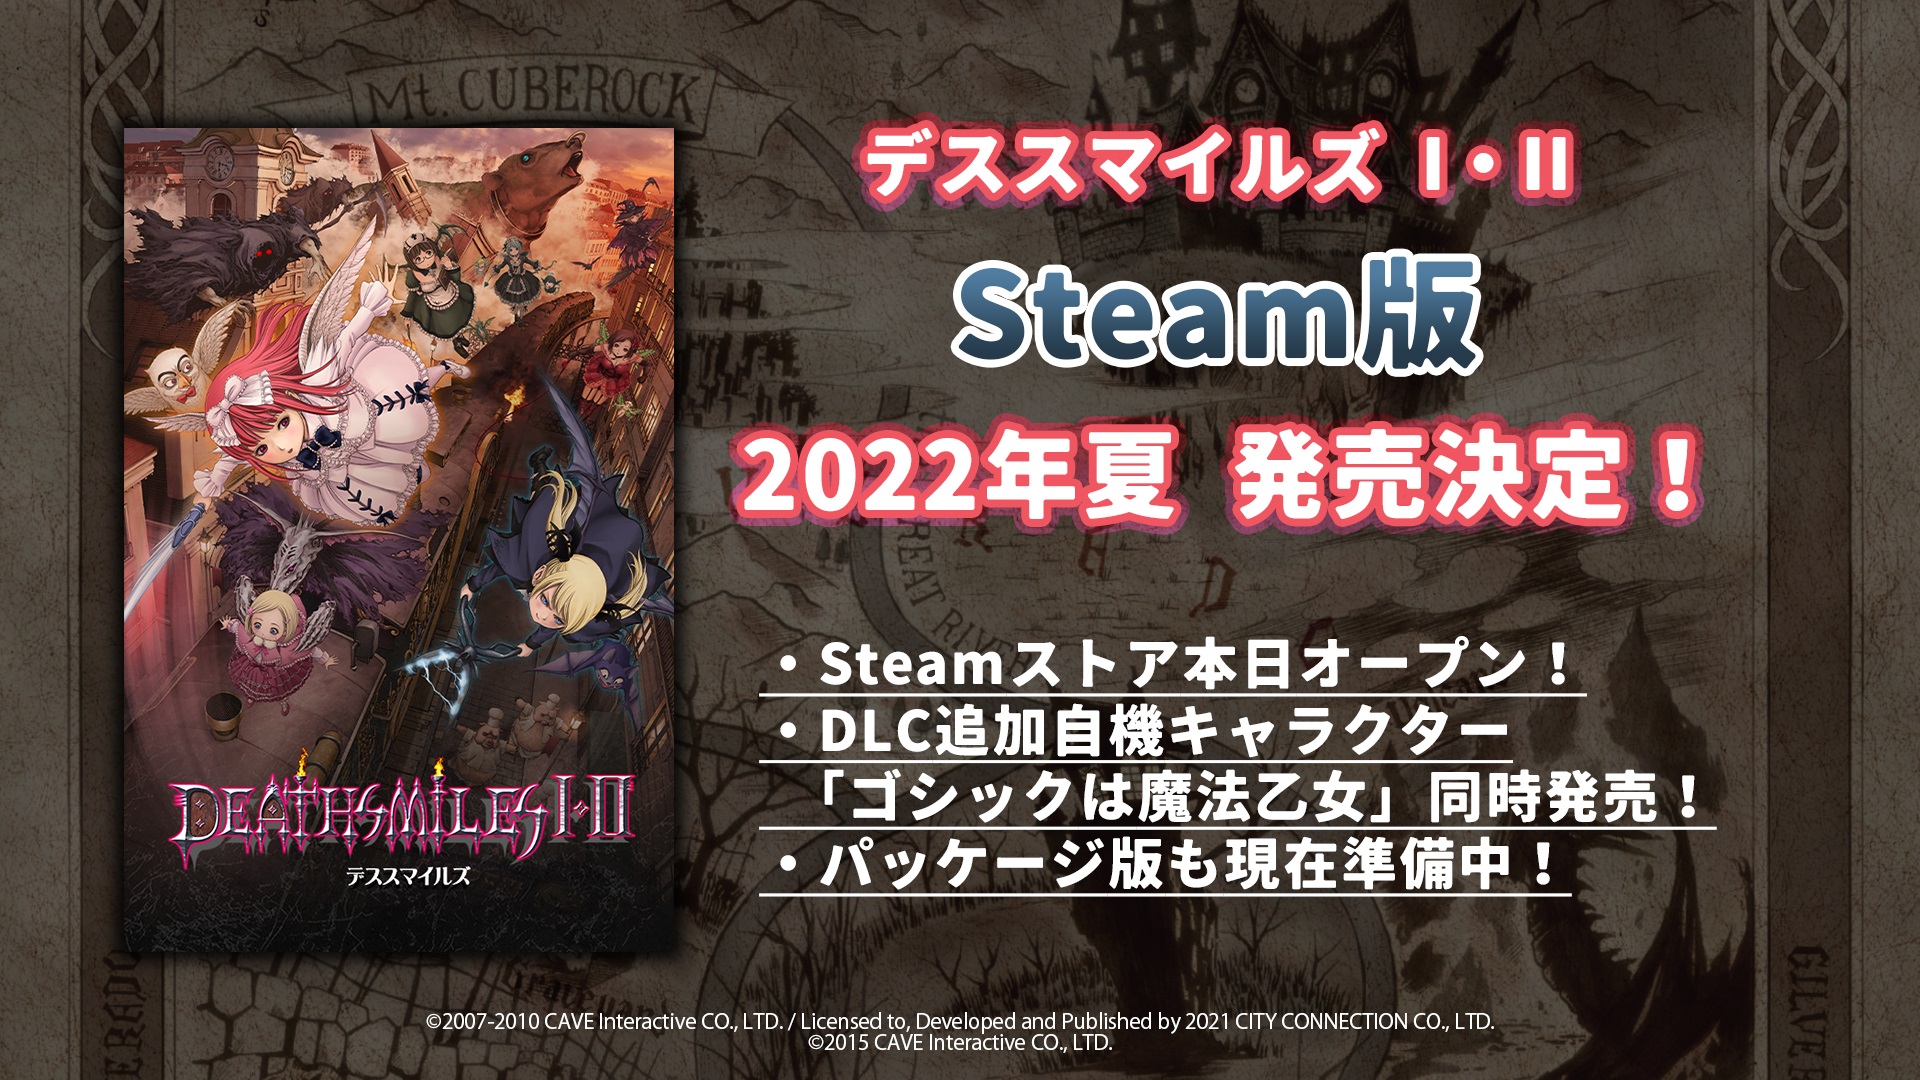 Deathsmiles I & II is coming to PC in summer 2022